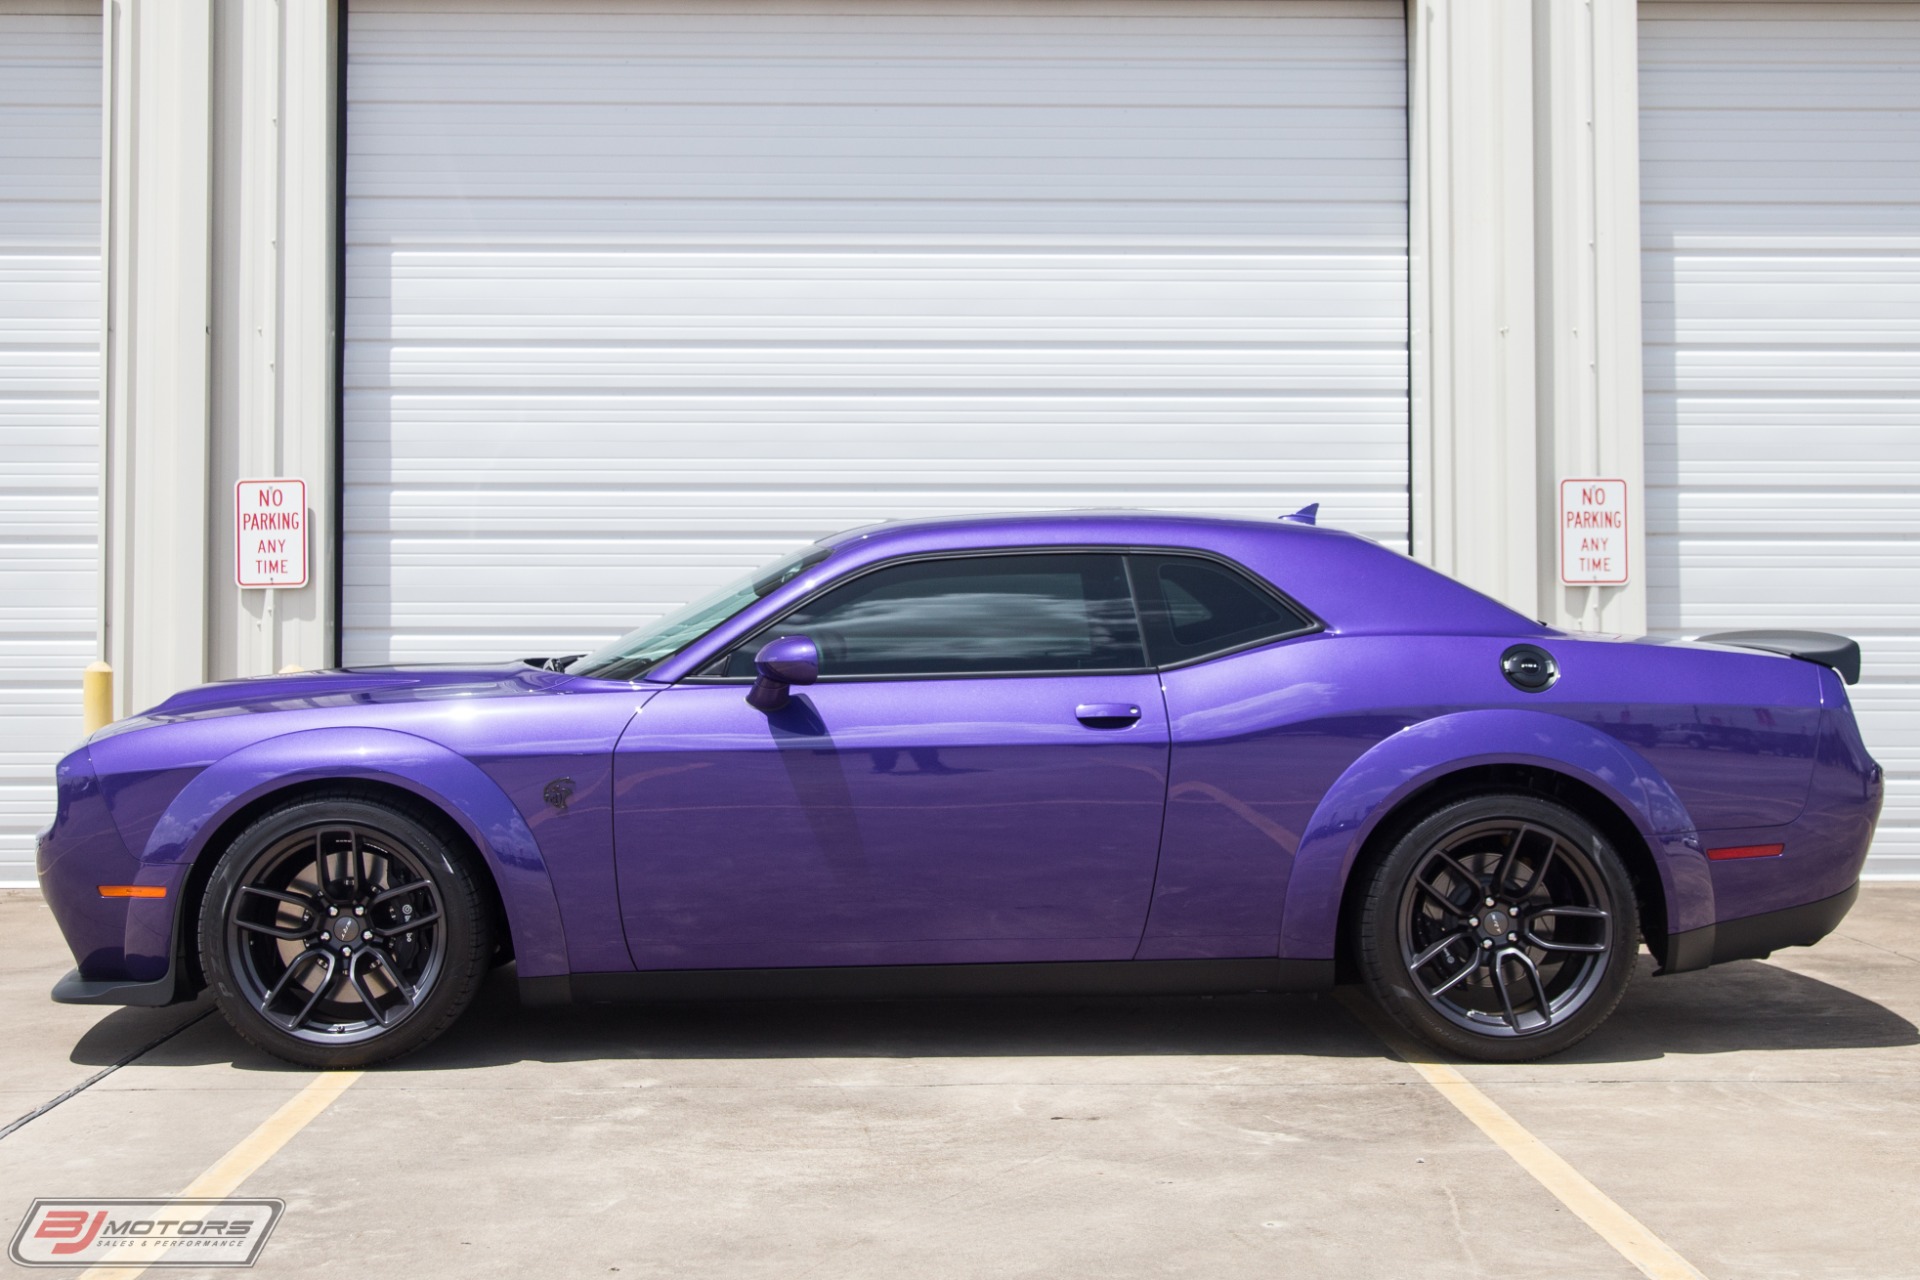 Used 2019 Dodge Challenger Srt Hellcat Redeye For Sale Special Pricing 